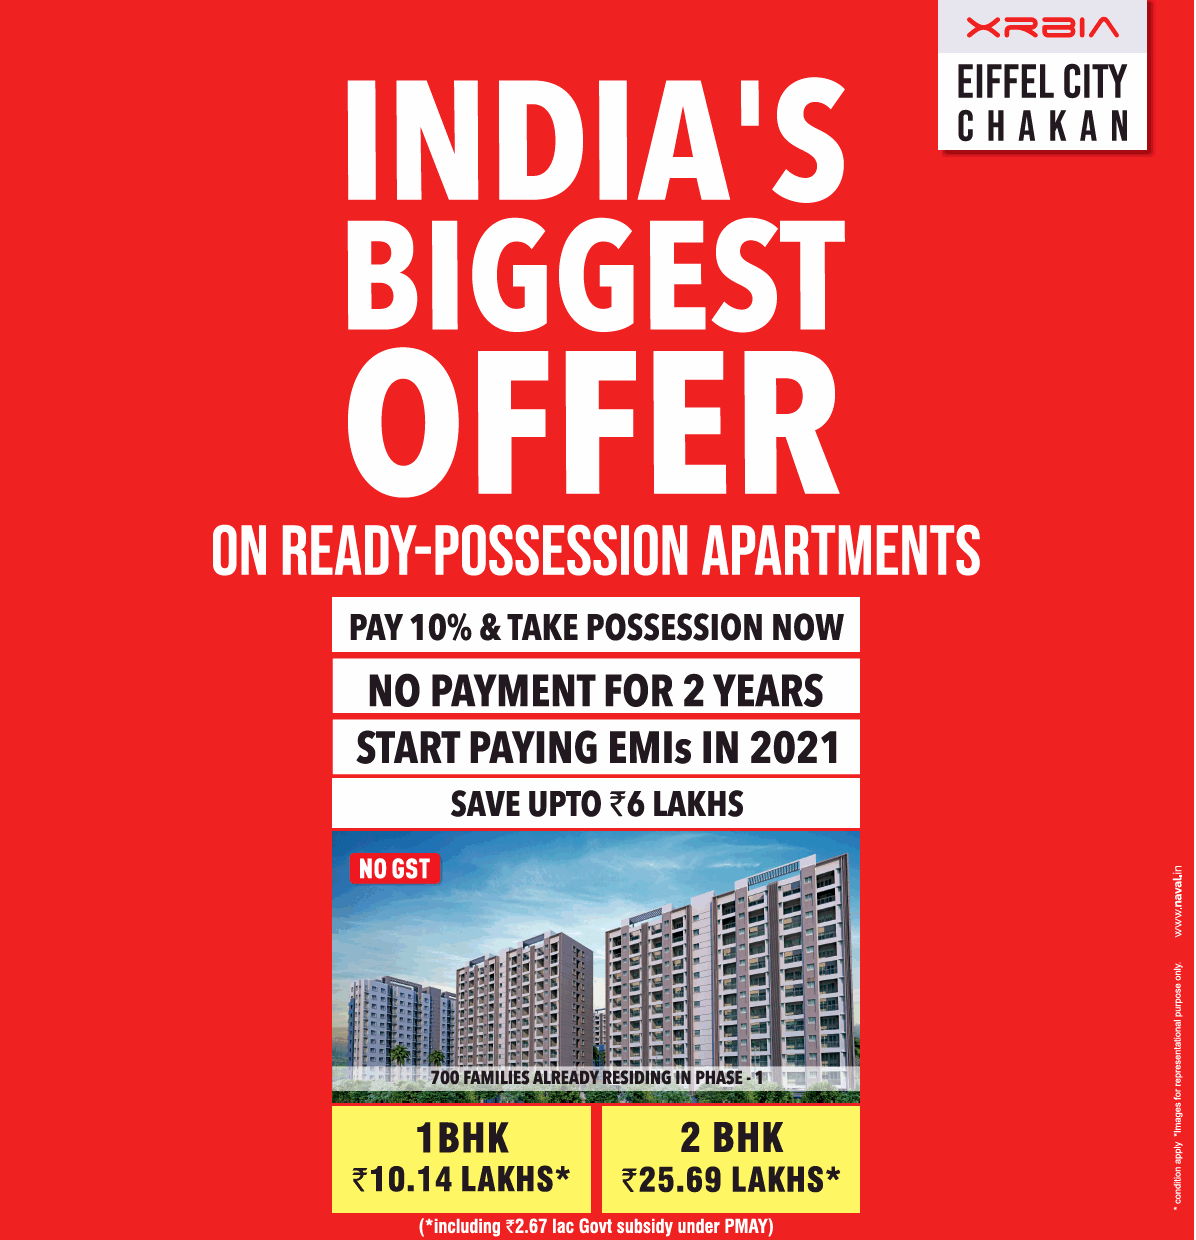 India's biggest offer on ready possession apartments at XRBIA Eiffel City in Pune Update